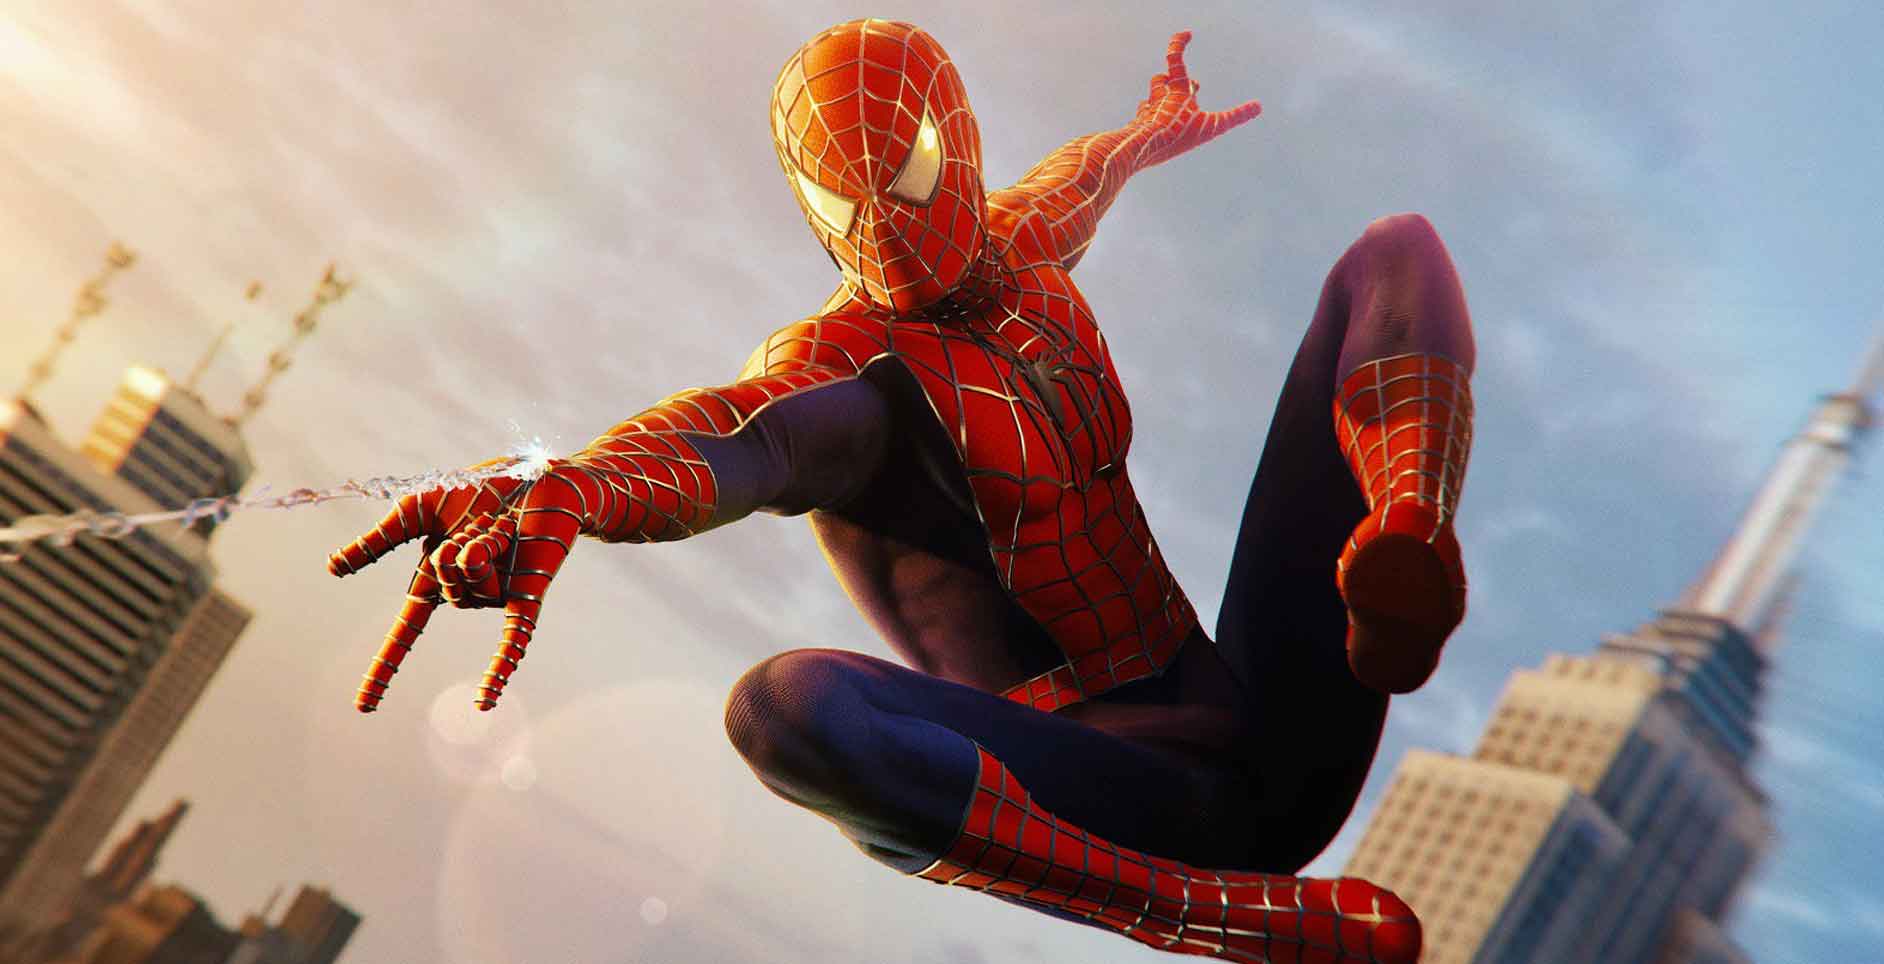 The Loadout on X: With Spider-Man 2, @insomniacgames has once